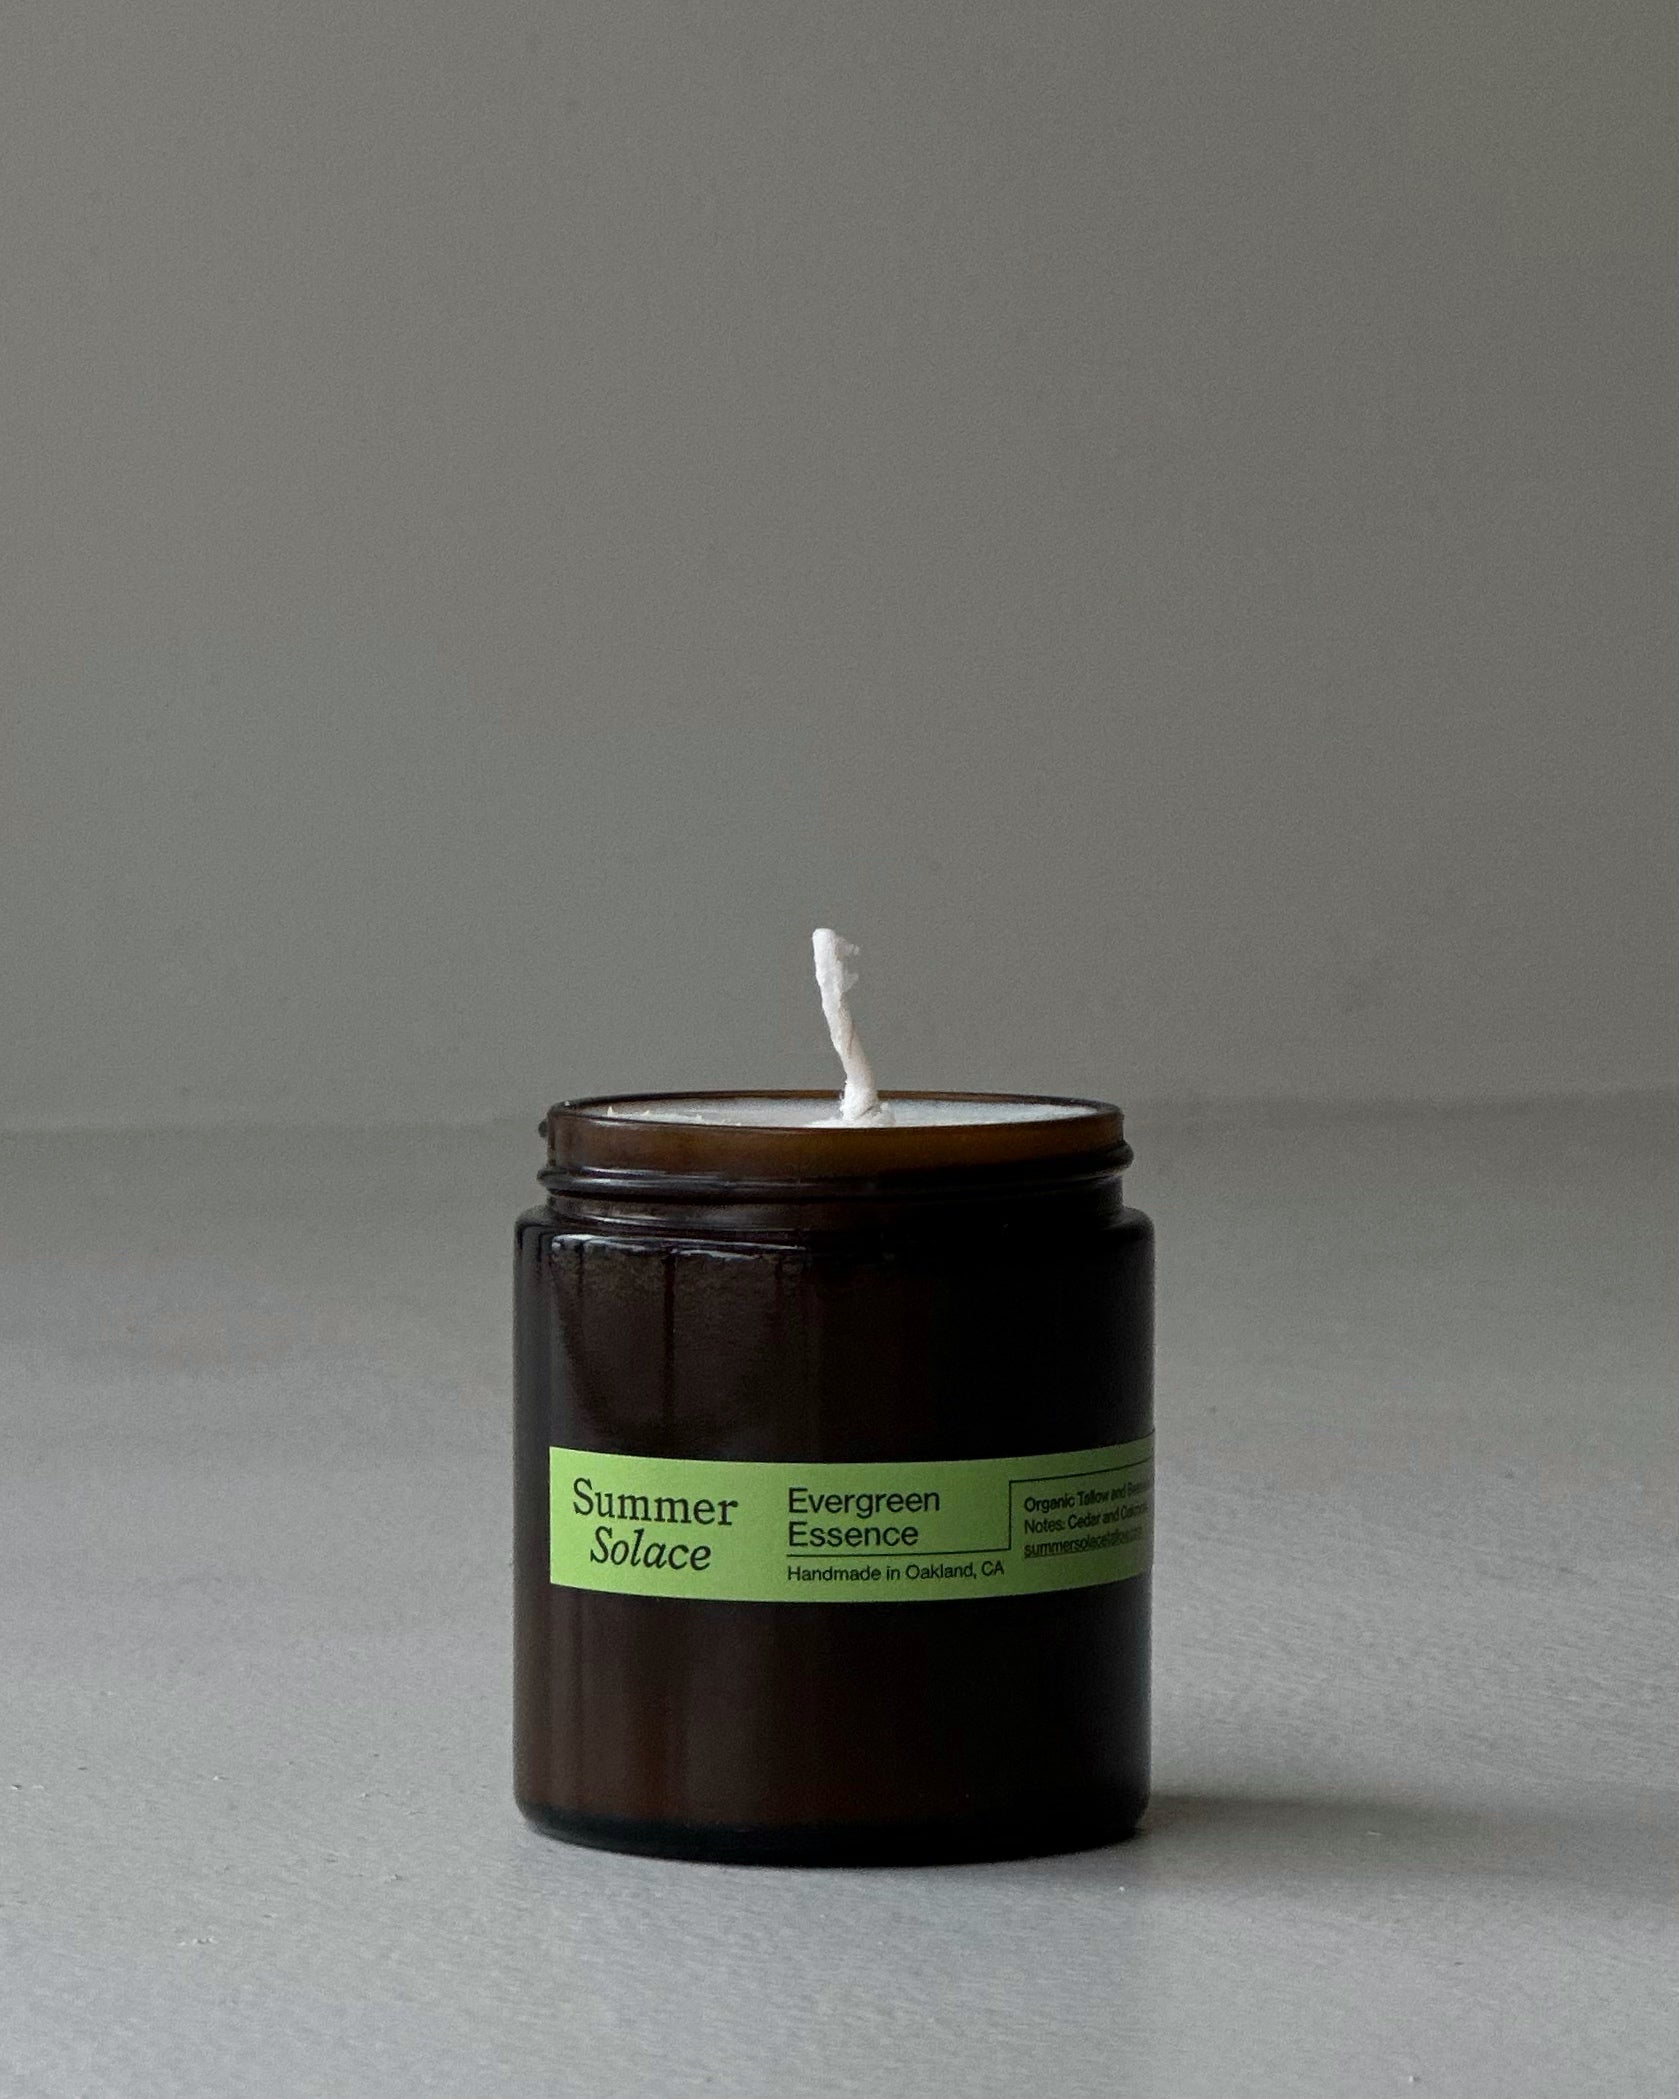 Summer Solace - Evergreen Essence Candle